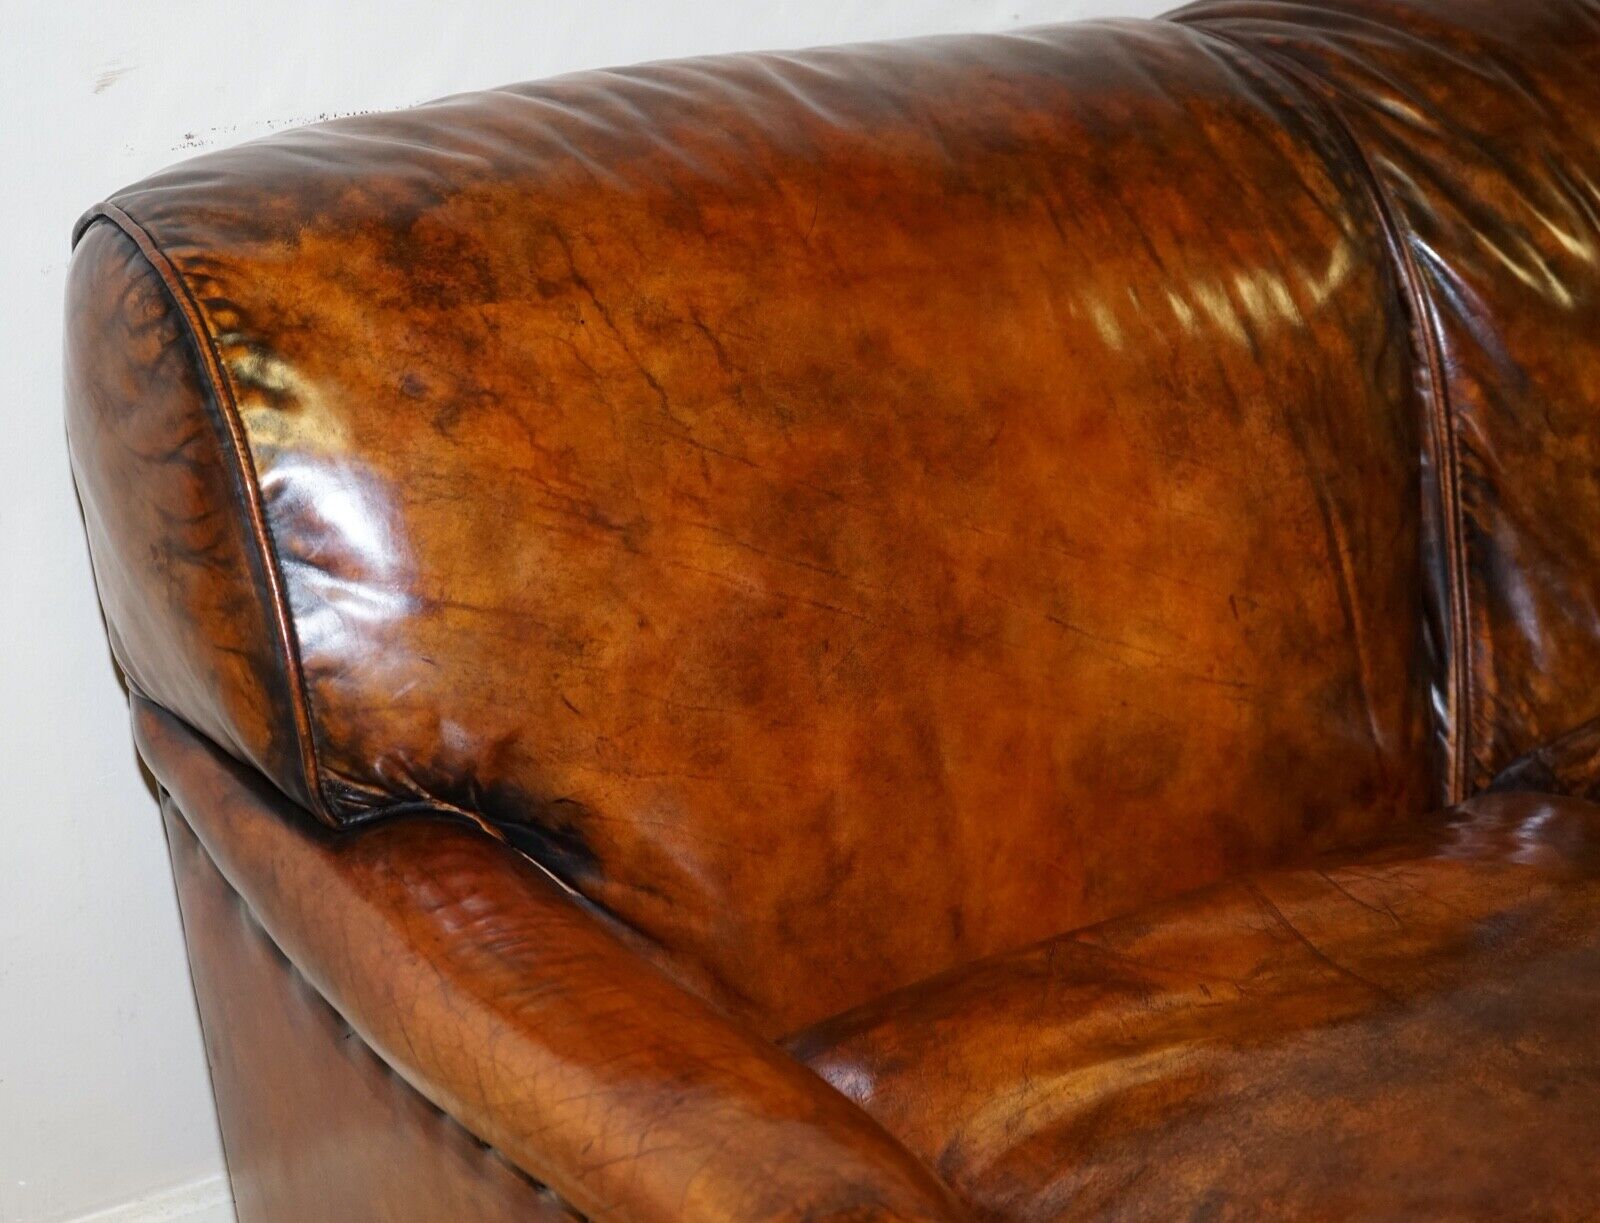 FULLY RESTORED HAND DYED LEATHER SOFA HOWARD & SONS STYLE FEATHER FILLED